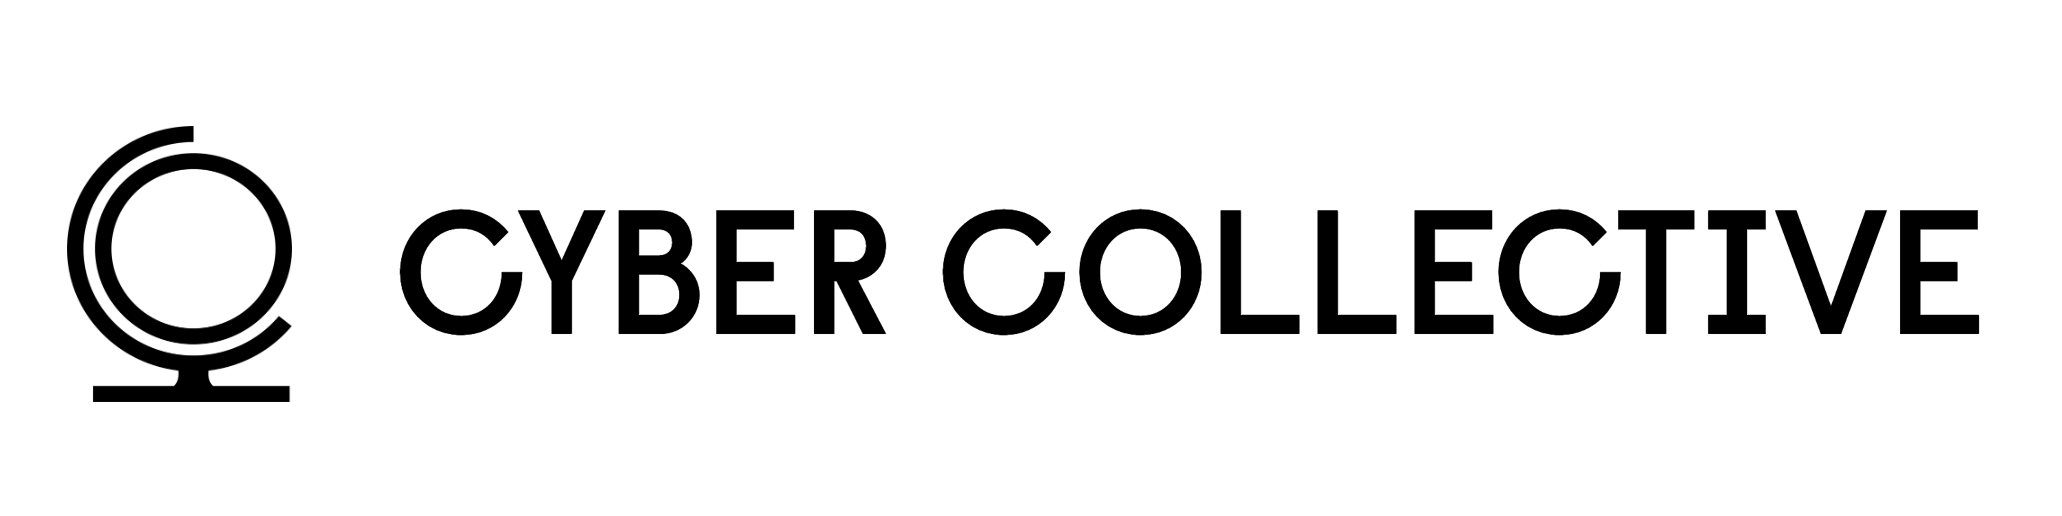 Cyber Collective